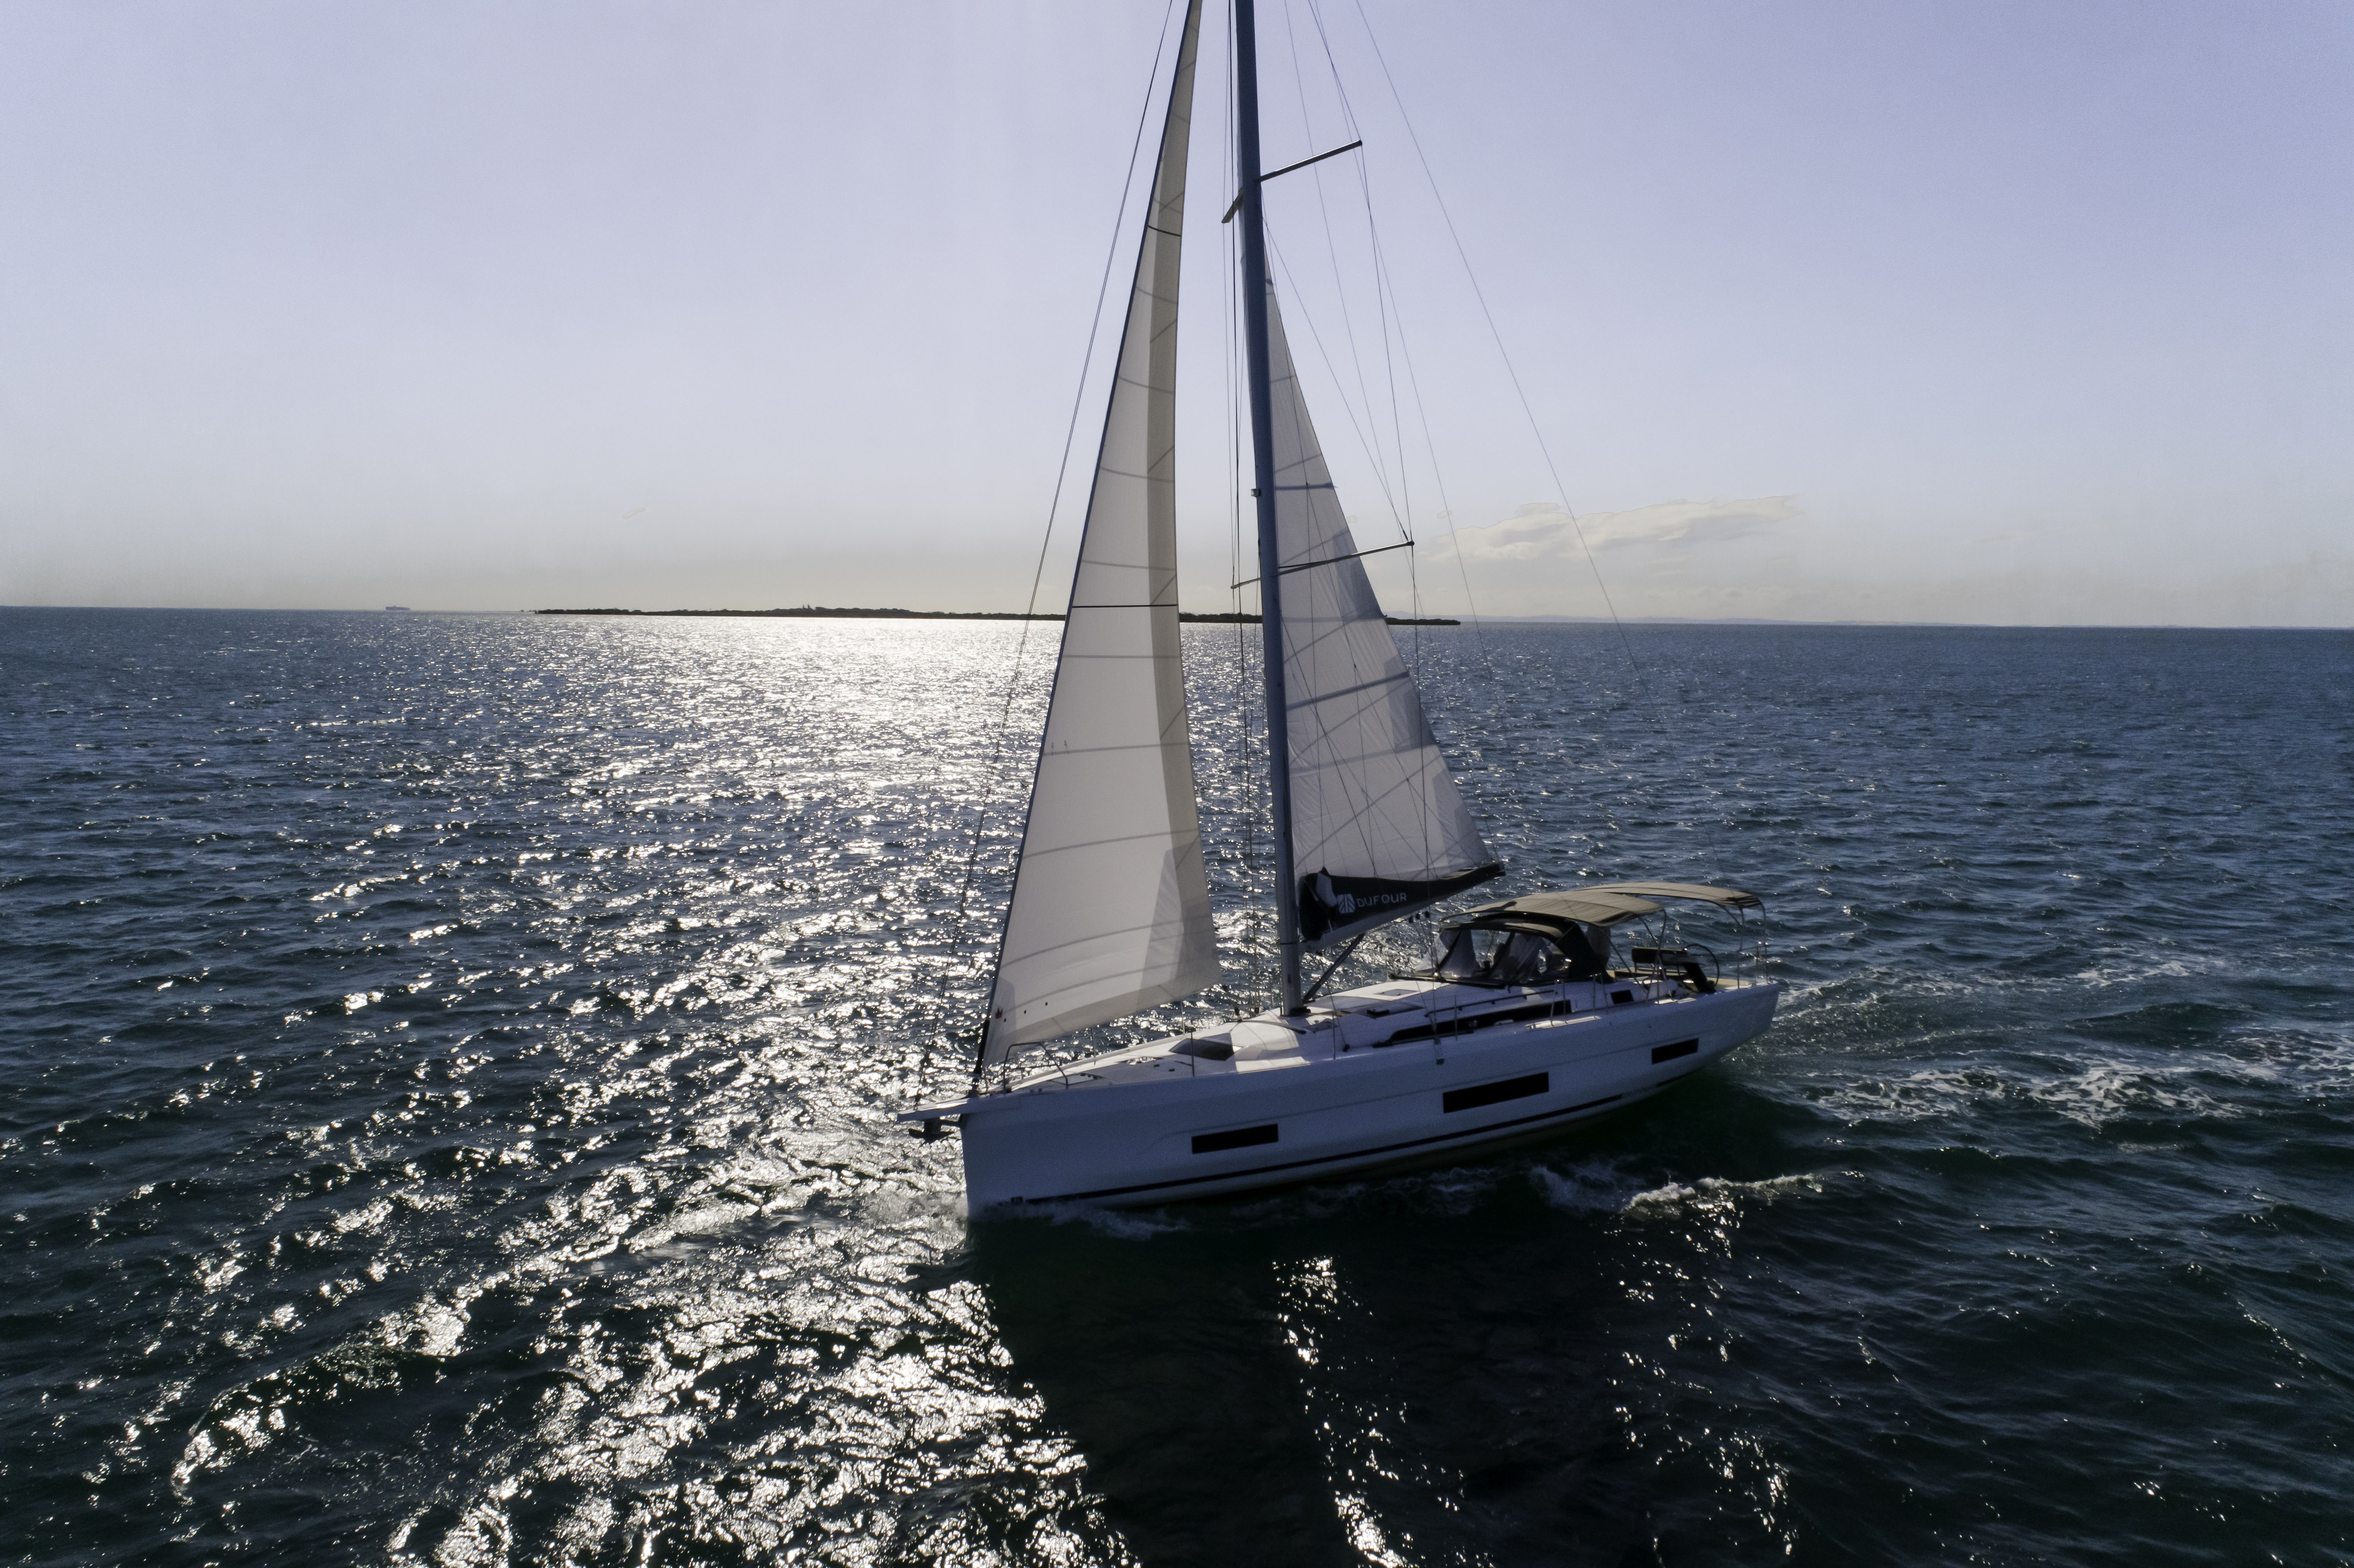 The Dufour provides a stable sailing experience